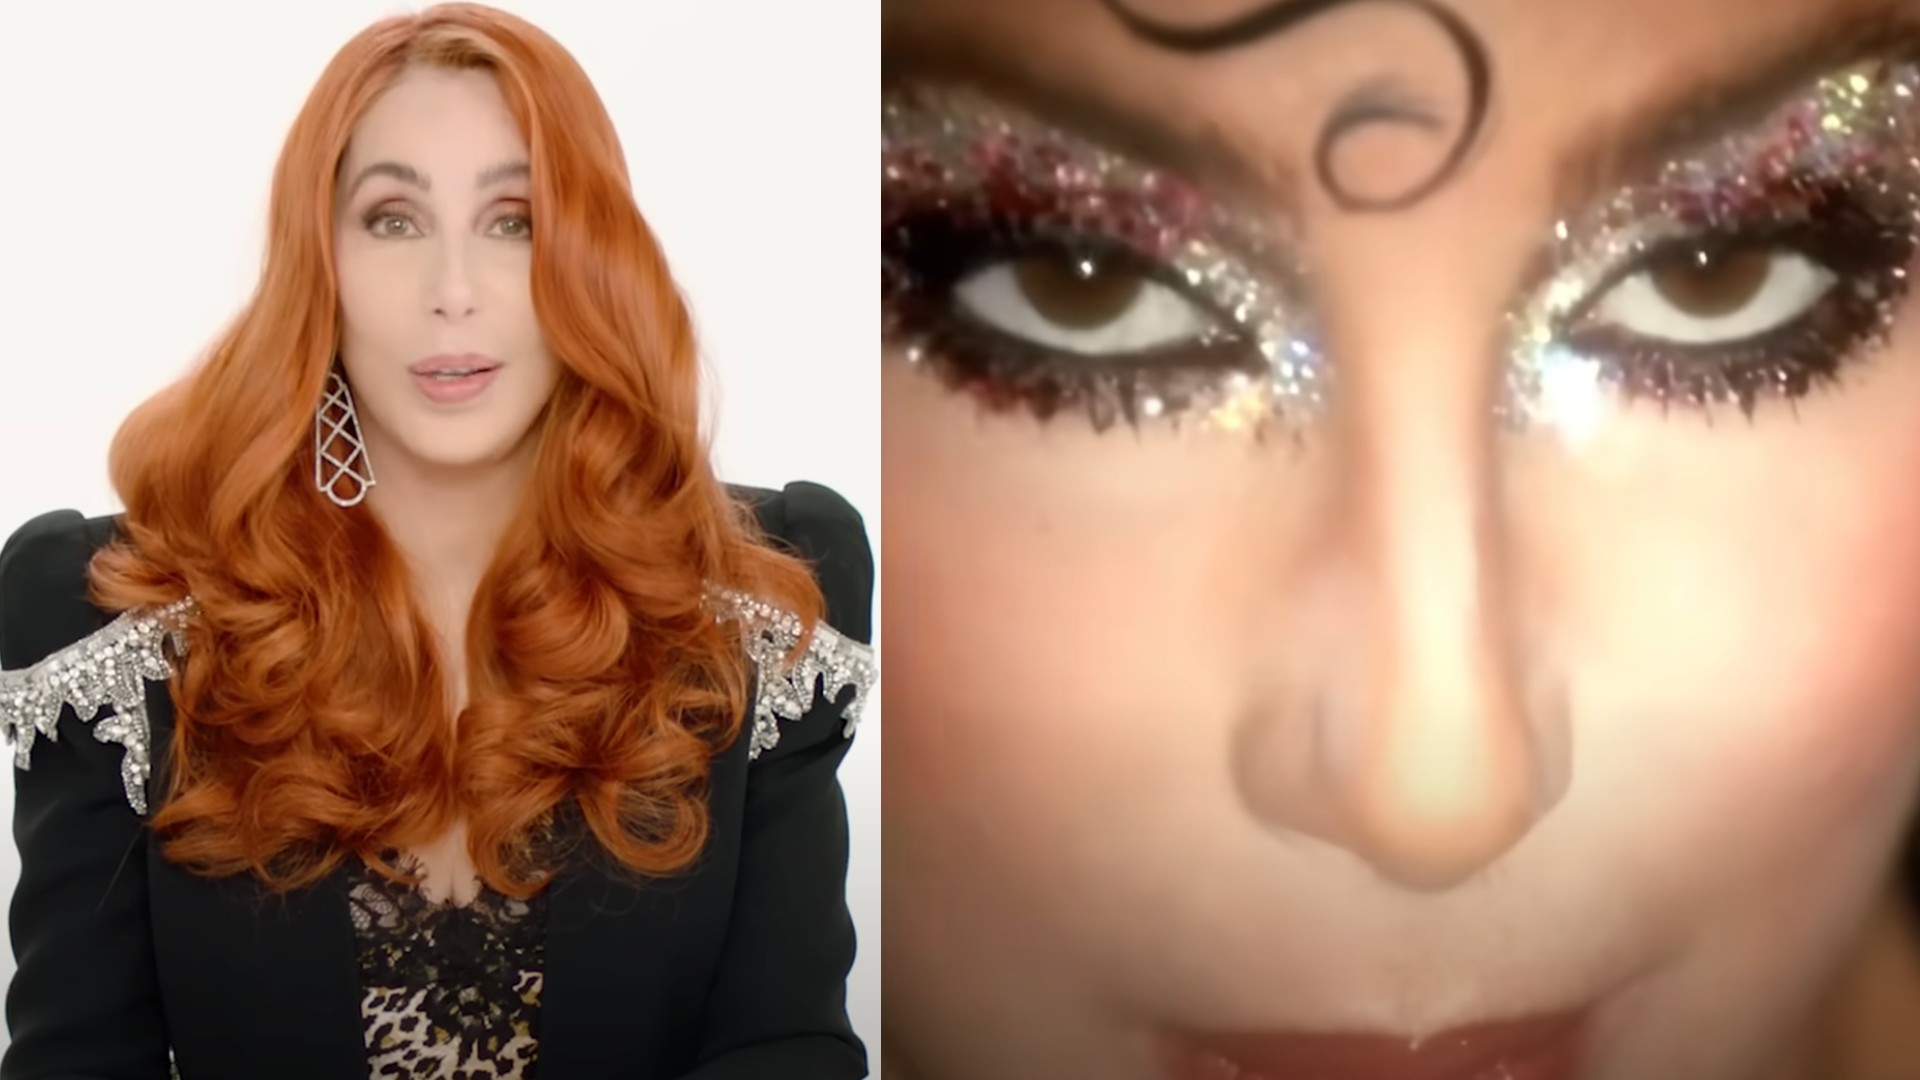 The image features a split screen: the left side shows a person with long, wavy red hair, wearing a black outfit with silver embellishments; the right side shows a close-up of heavily made-up eyes with glittery eyeshadow and dramatic eyeliner.